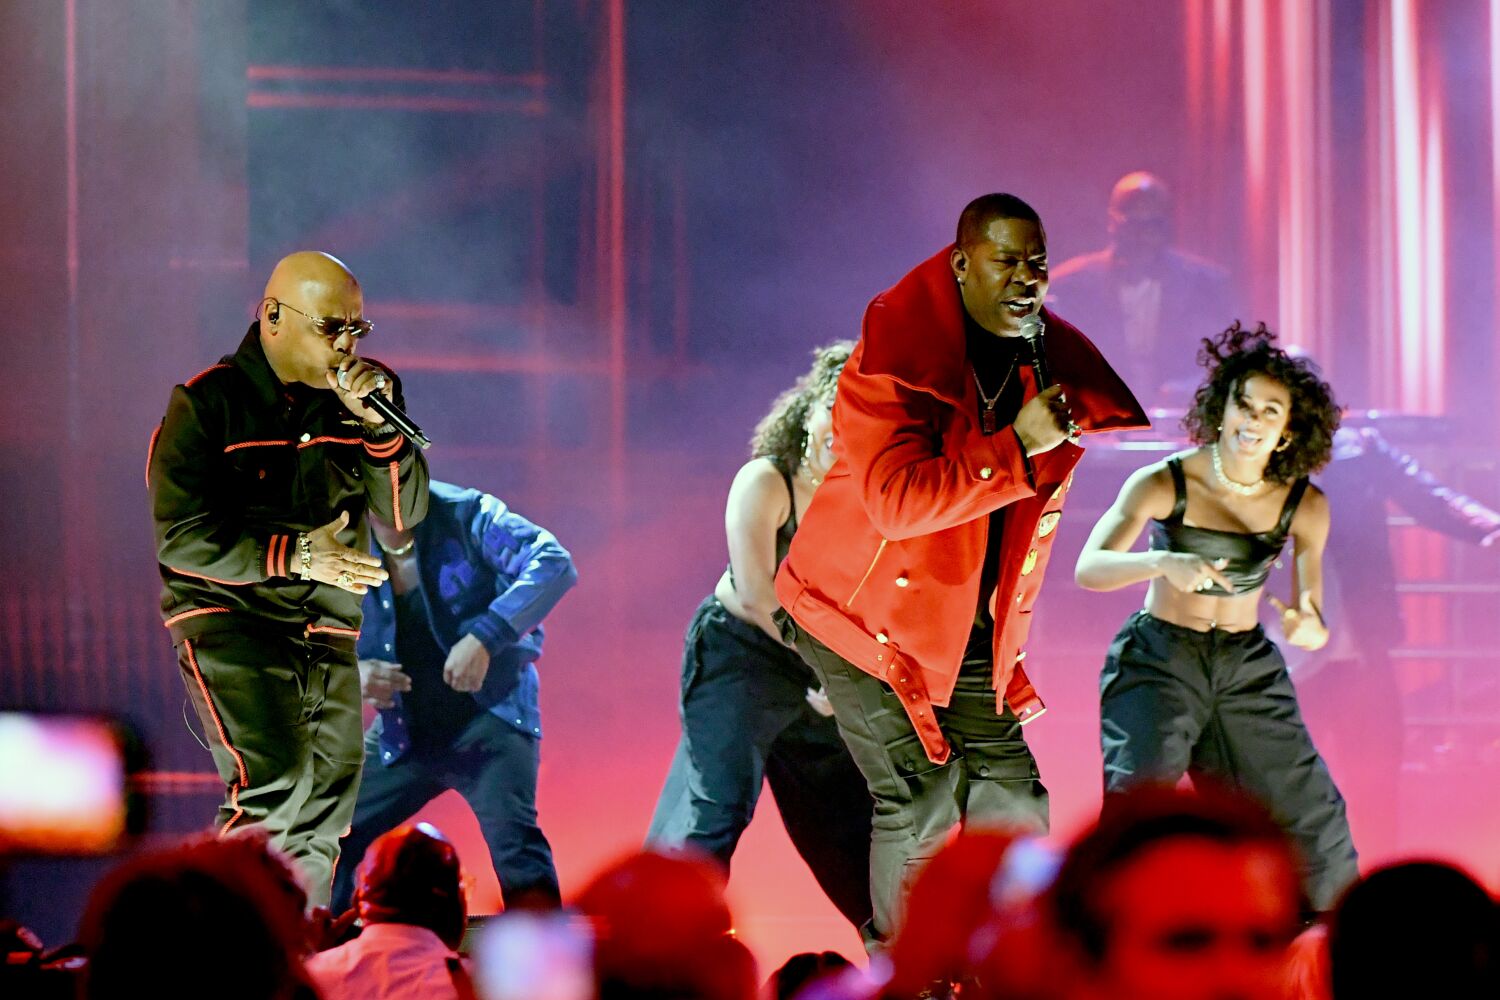 'I was levitating': Rapper Busta Rhymes on his show-stopping Grammys performance